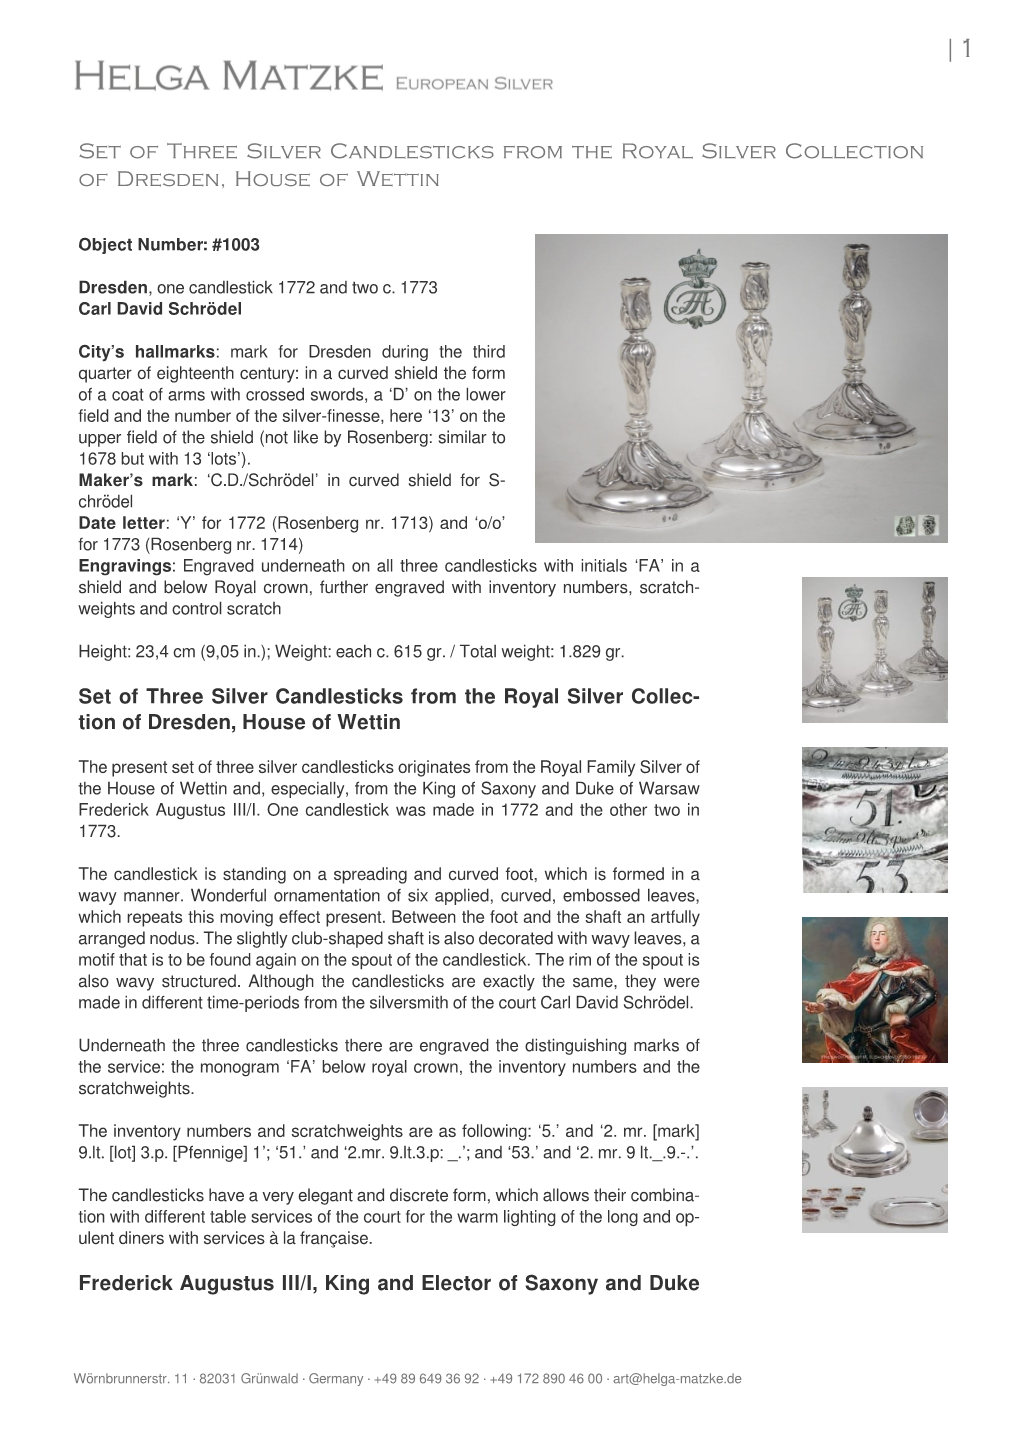 Set of Three Silver Candlesticks from the Royal Silver Collection of Dresden, House of Wettin